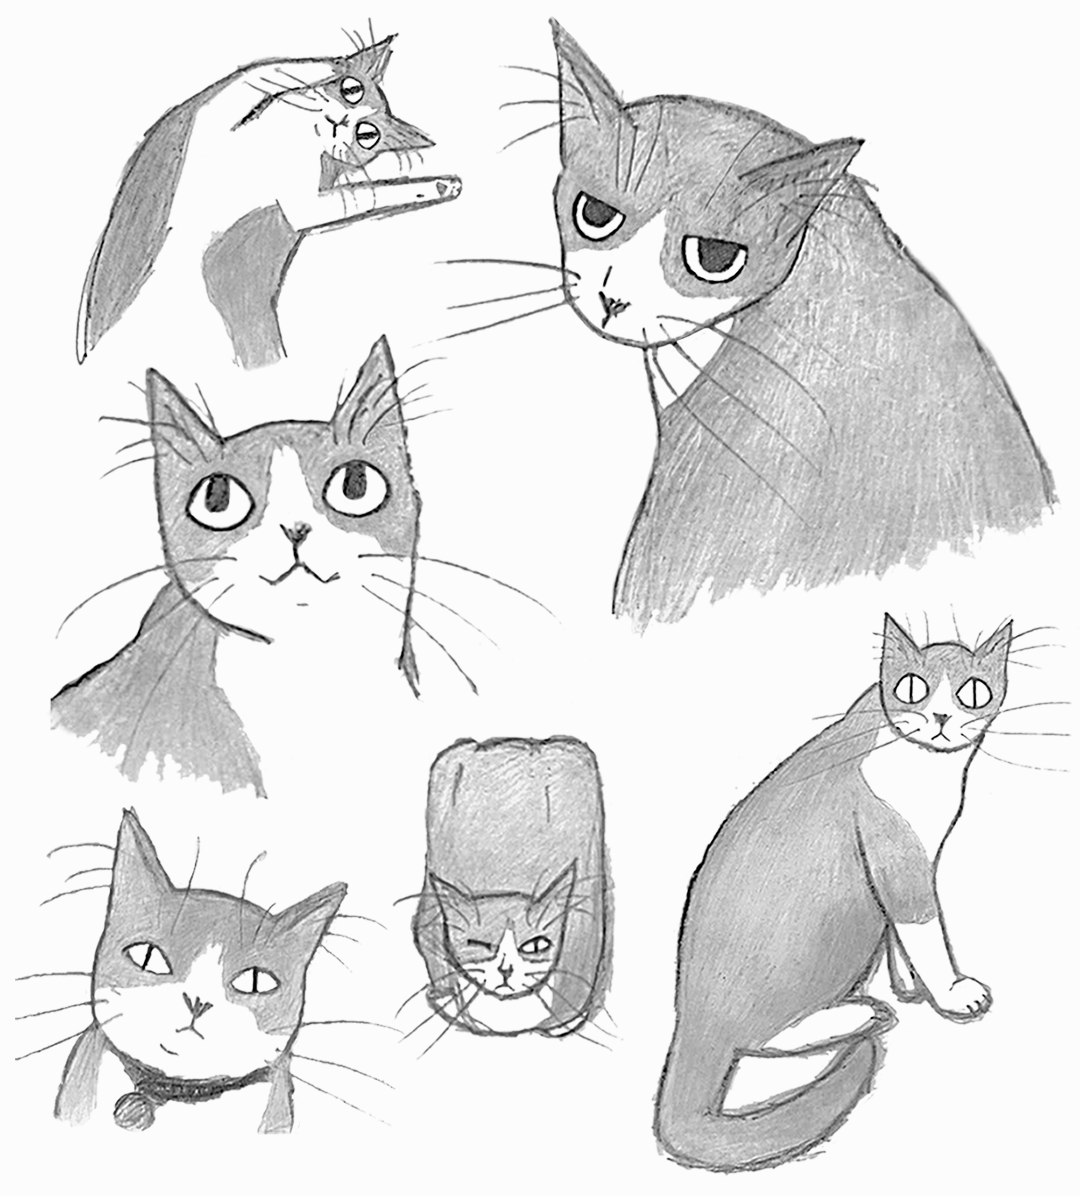 6 stylized grayscale pencil drawings of a tuxedo cat with various facial expressions and in a variety of poses on a slightly off-white background.